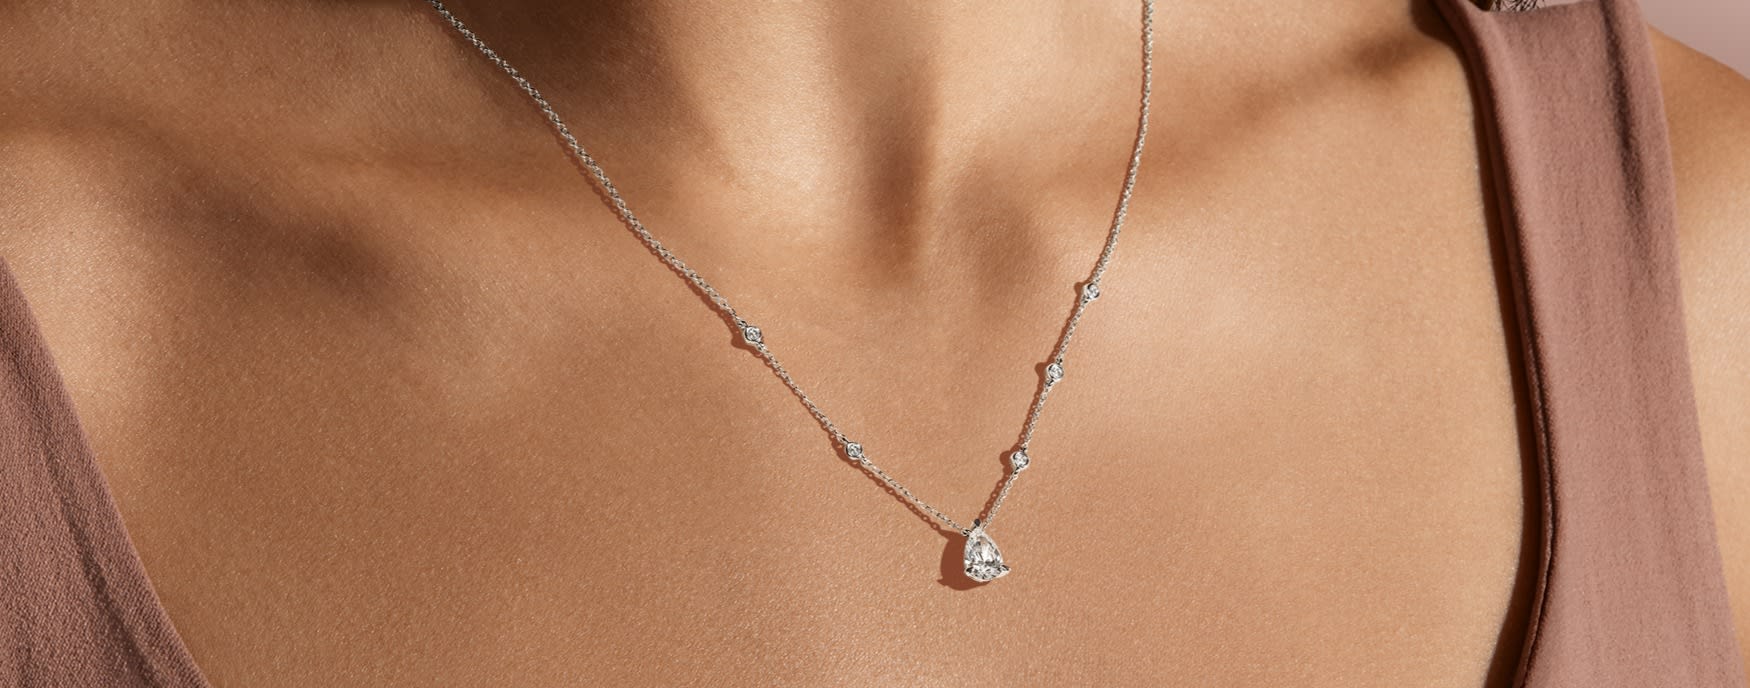 Pear Cut Station Necklace in 14K White Gold